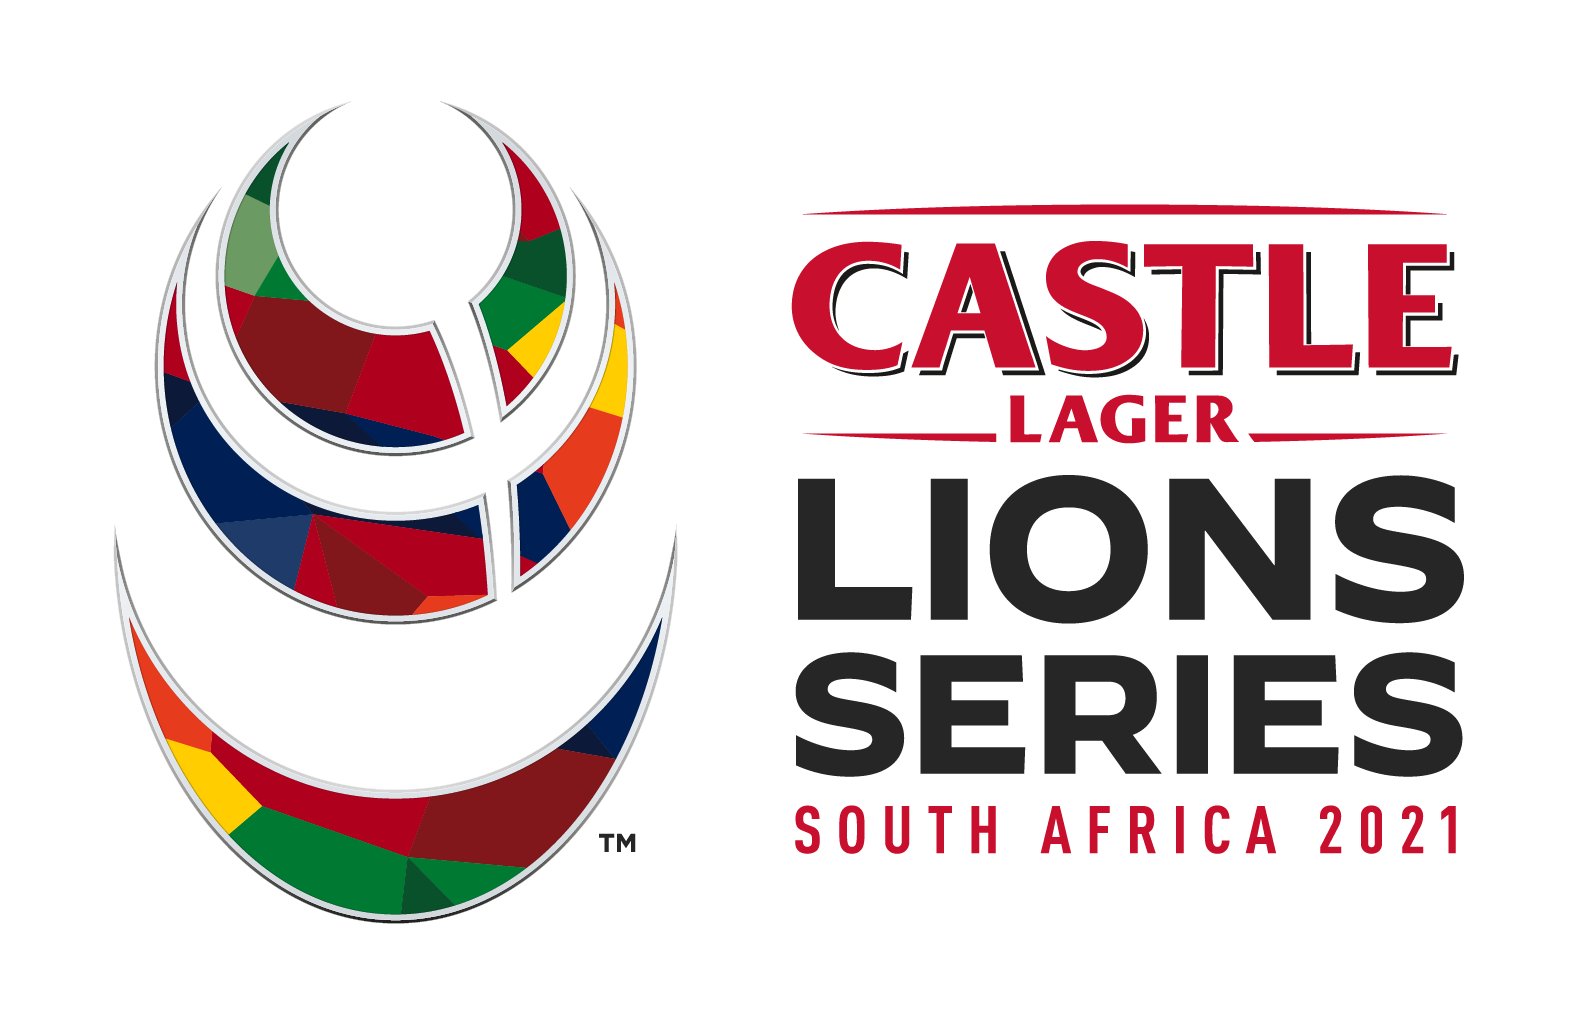 Castle Lager named as title partner of 2021 Lions series